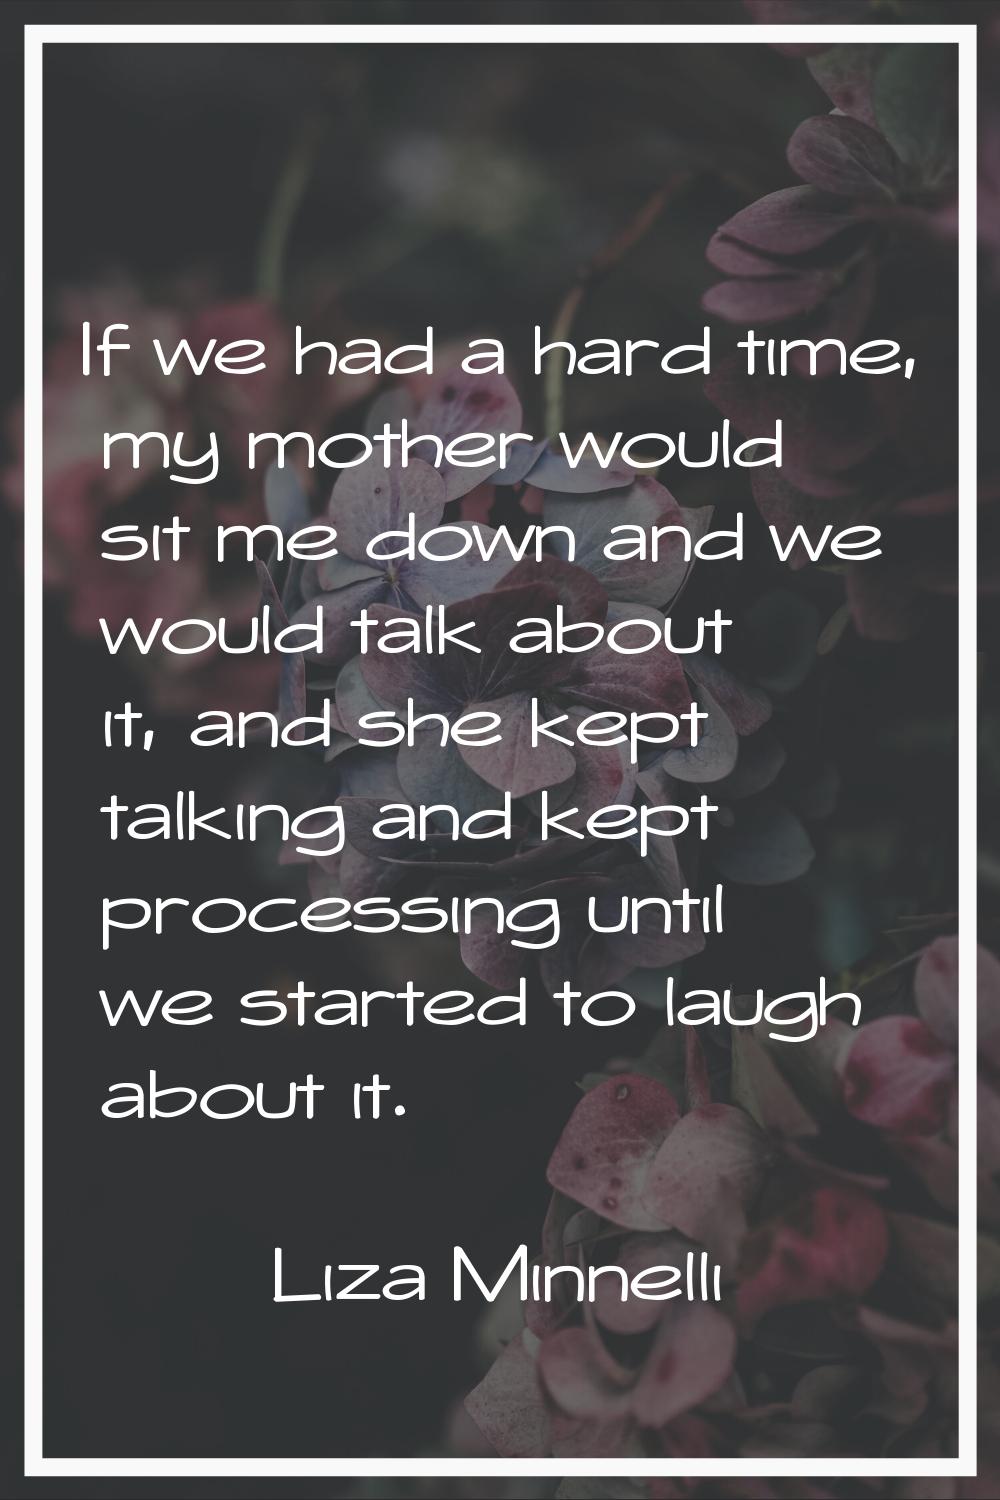 If we had a hard time, my mother would sit me down and we would talk about it, and she kept talking